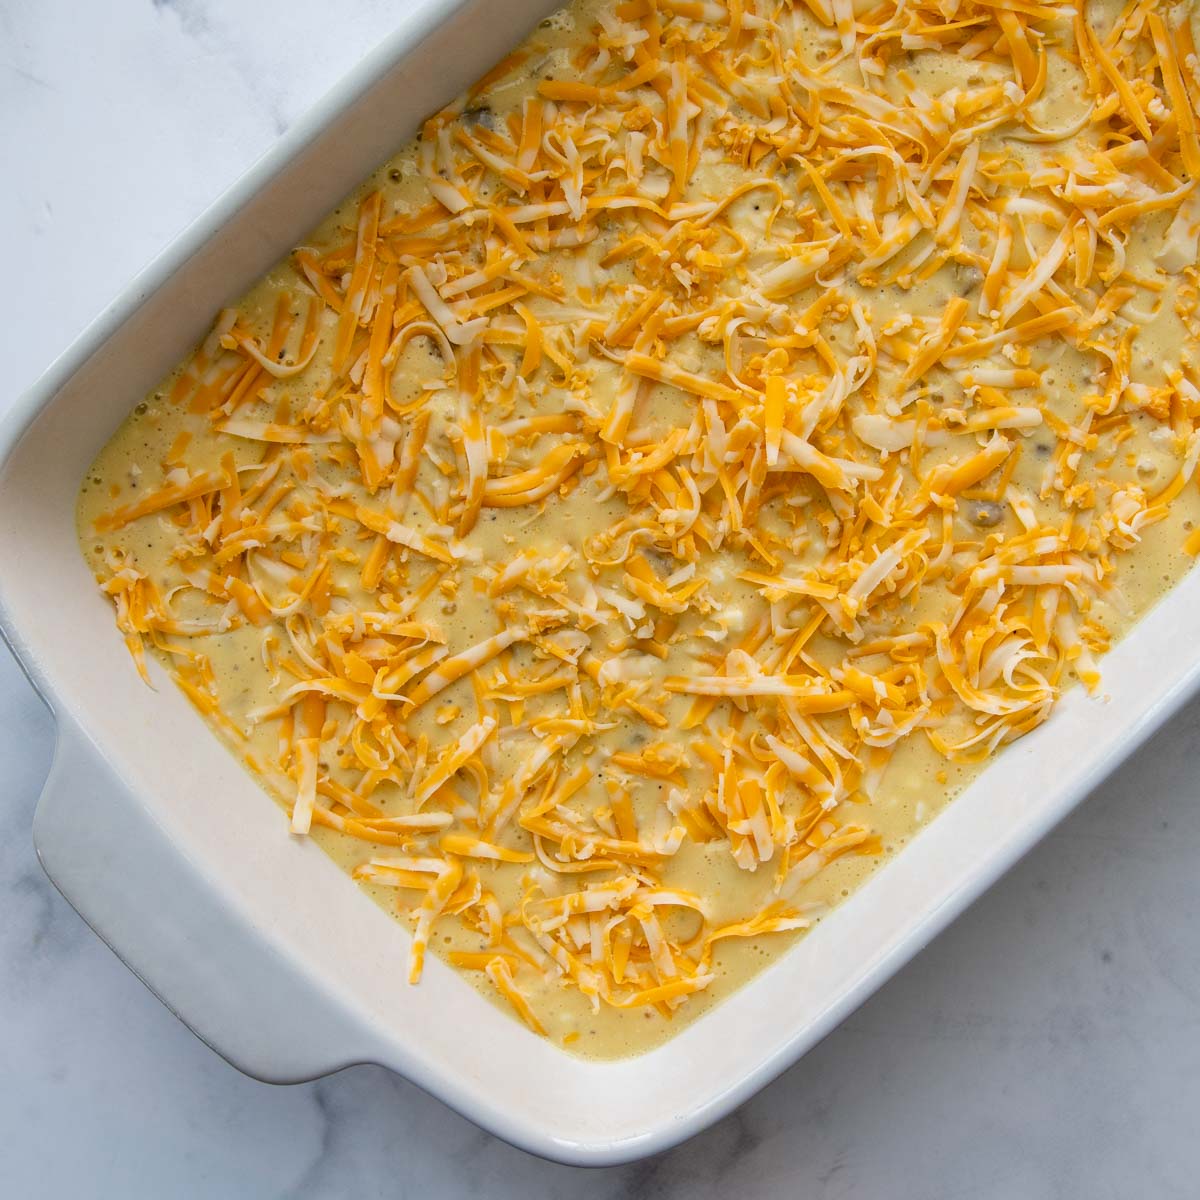 cheese sprinkled on top before baking